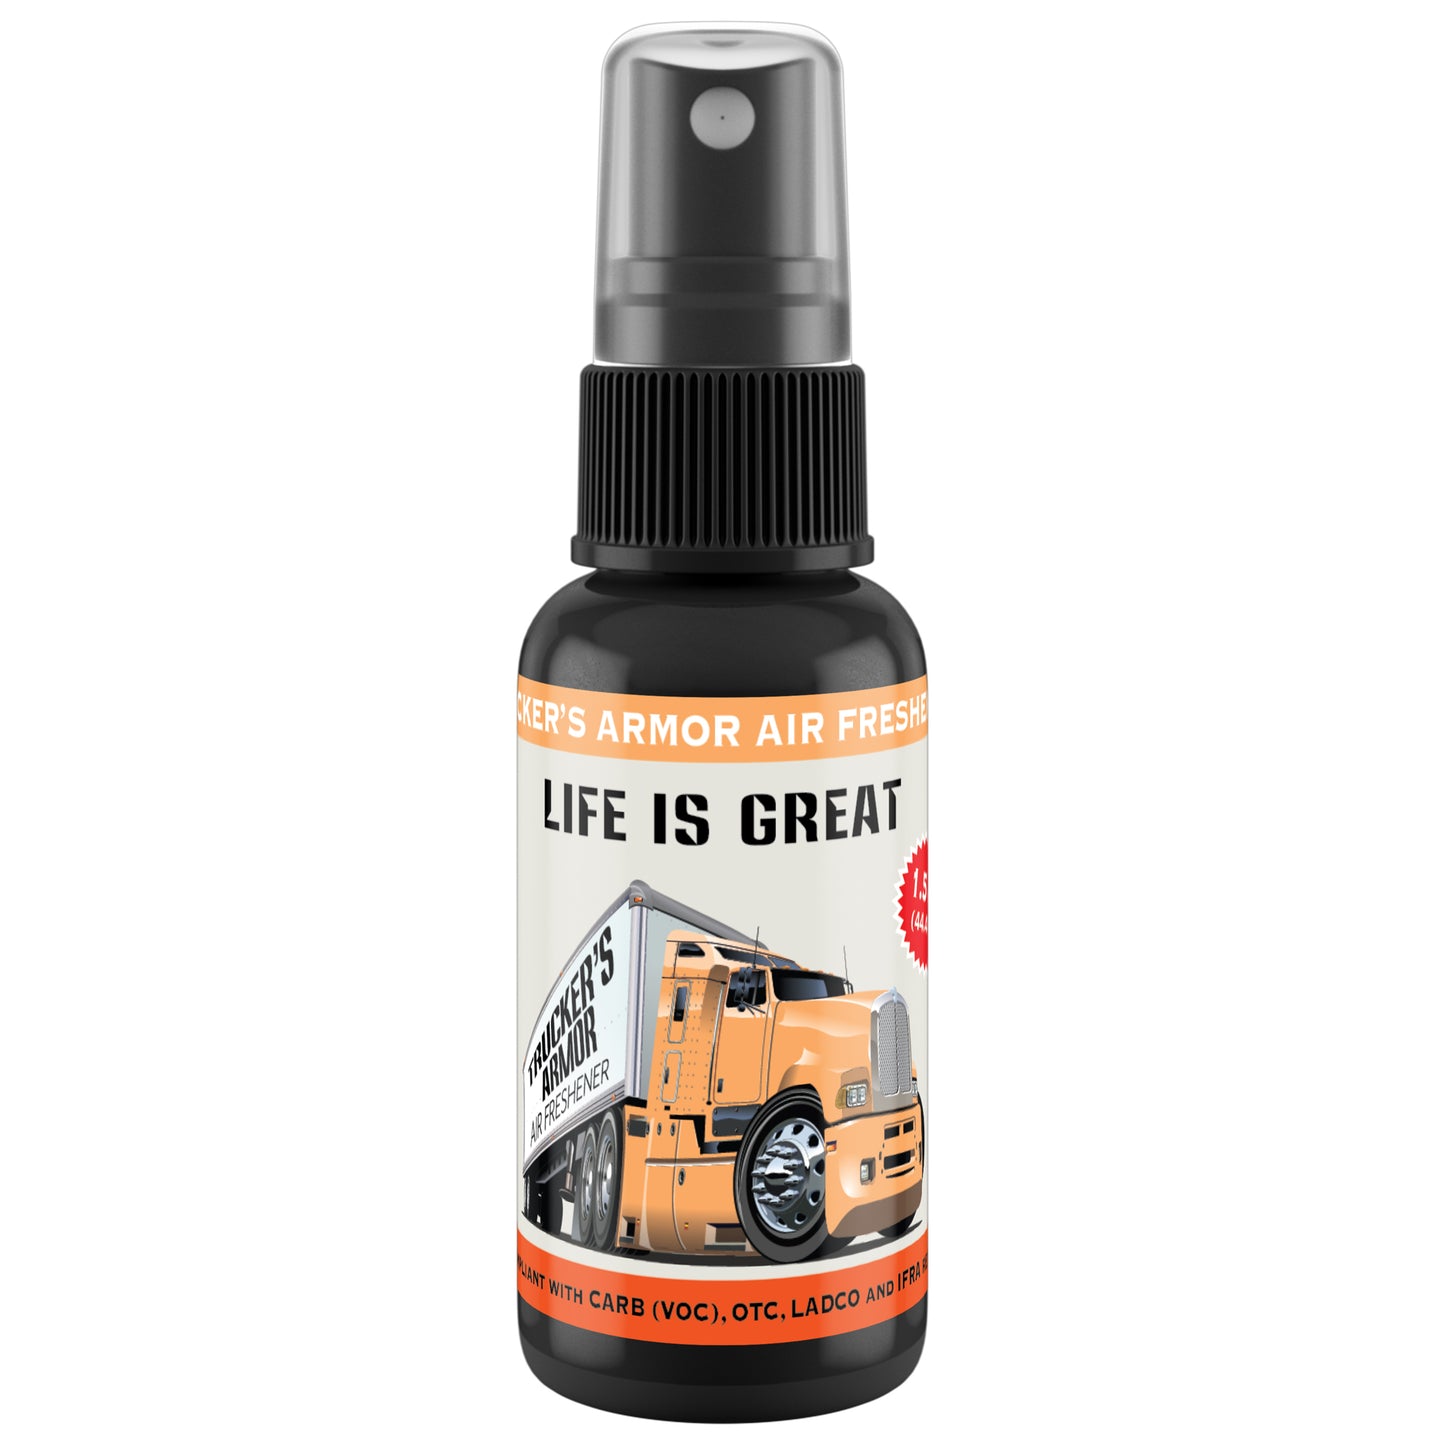 Trucker's Armor Air Freshener - Life is Great Scent